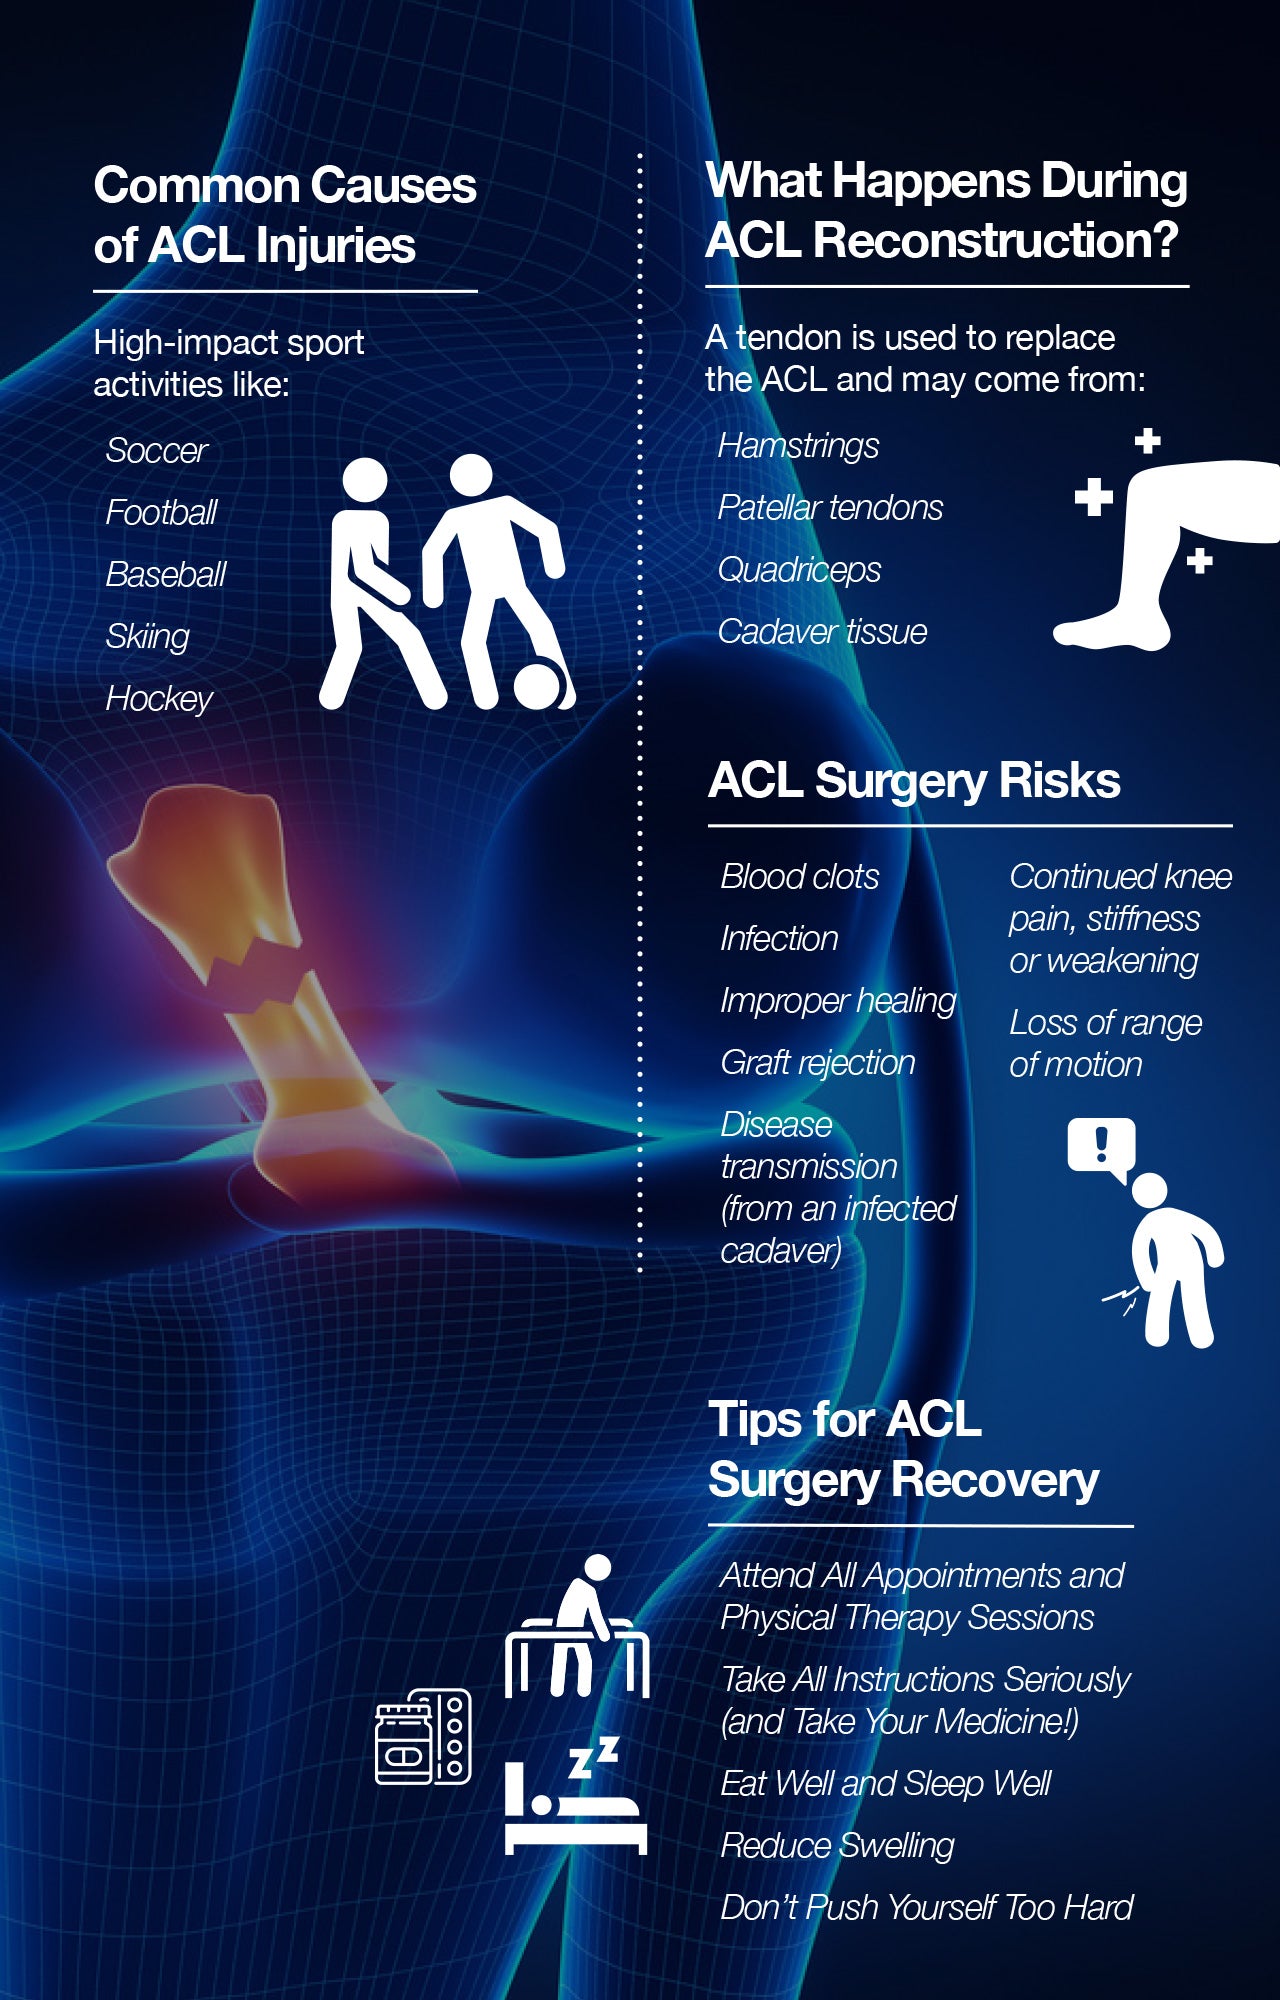 ACL surgery recovery tips to accelerate healing.